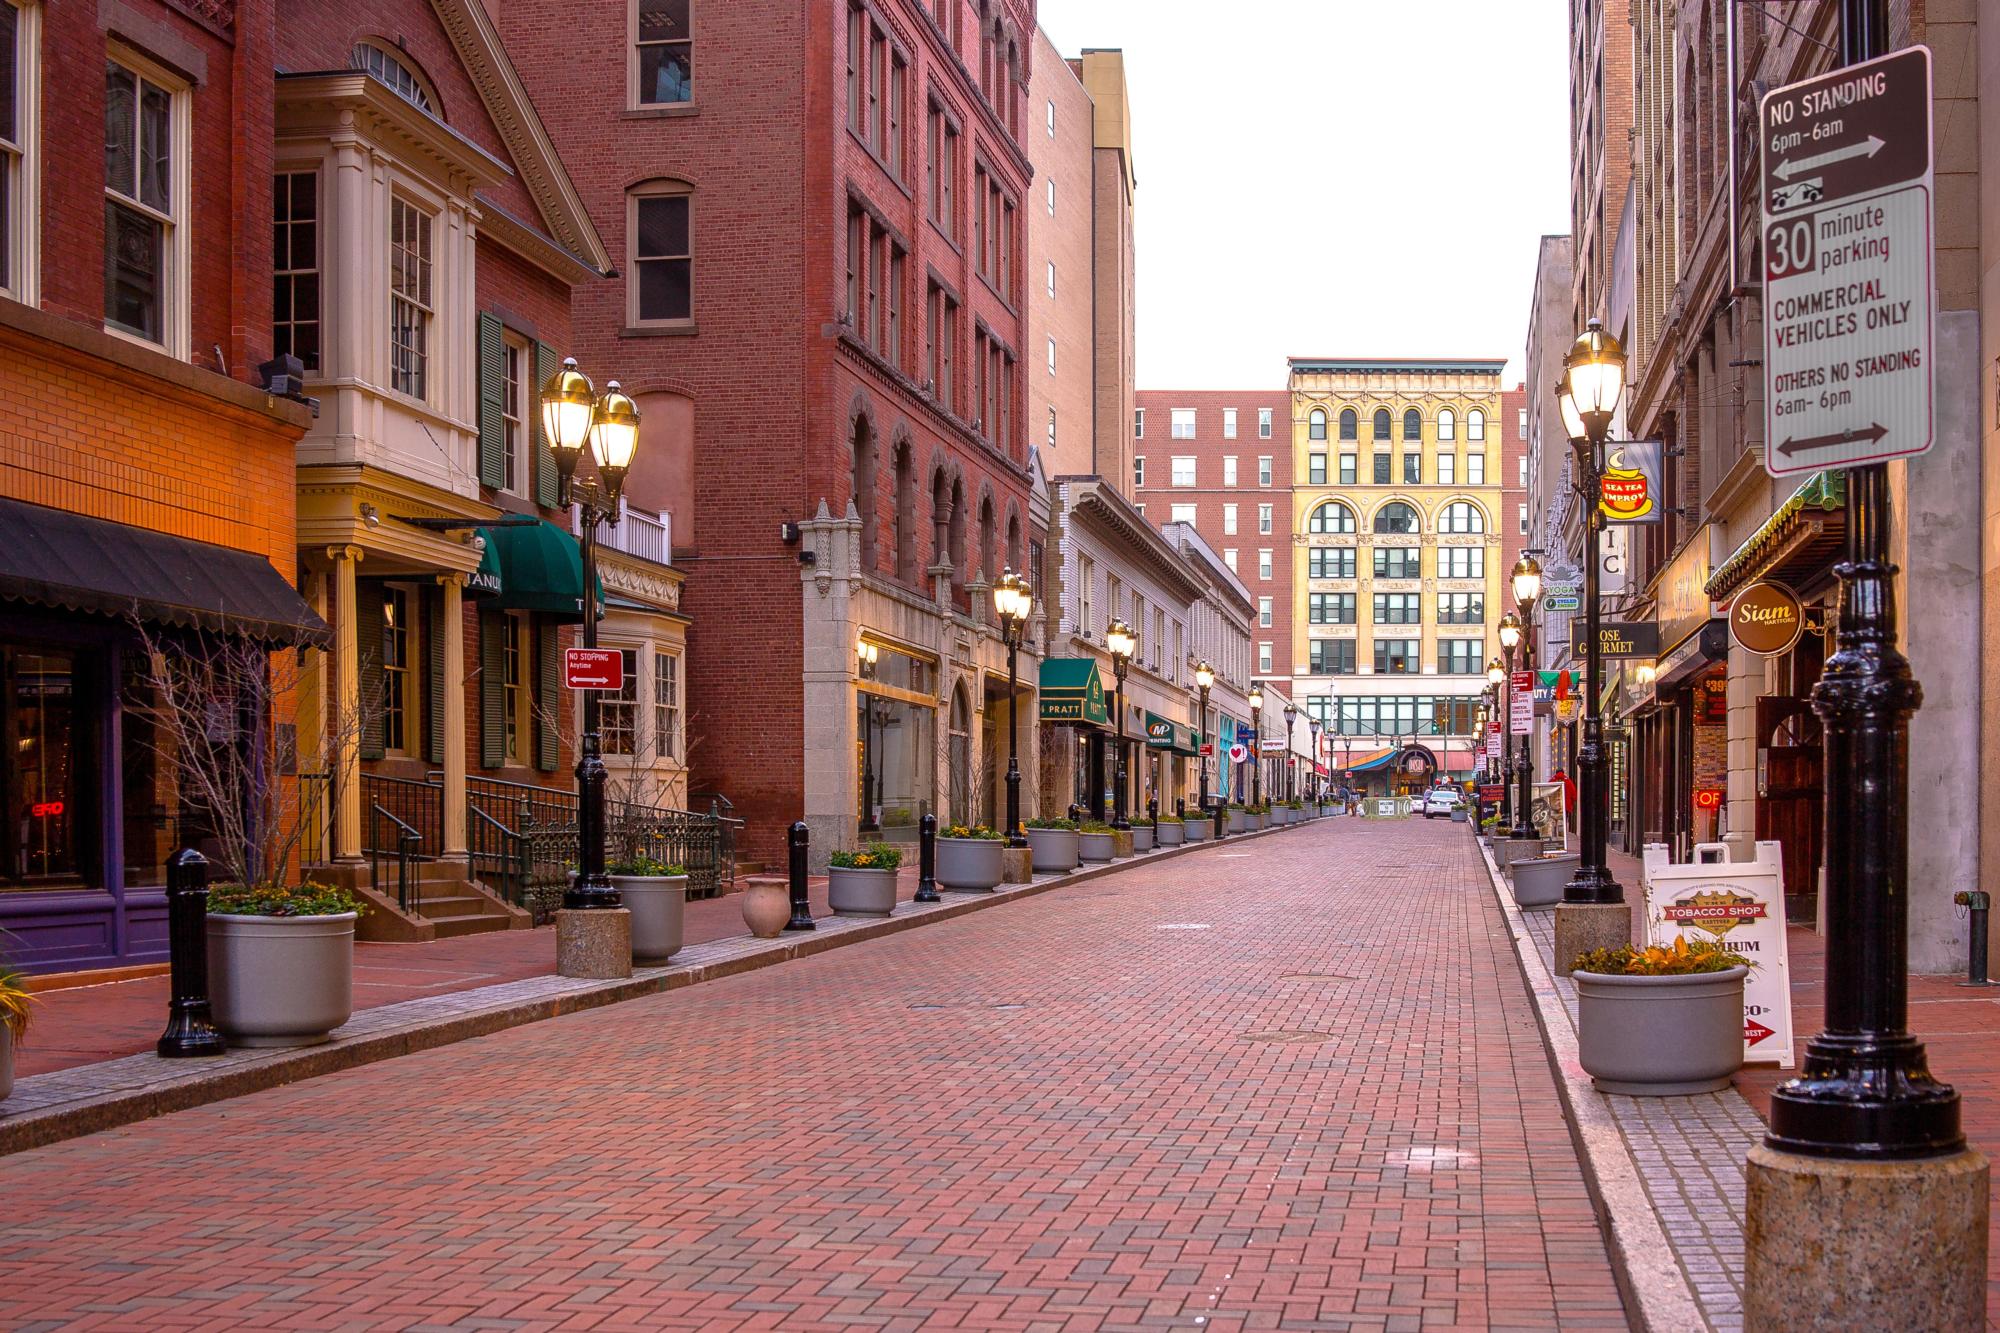 Pratt St. Historic District in midafternoon with bricked walkway, buildings, and lit street lamps